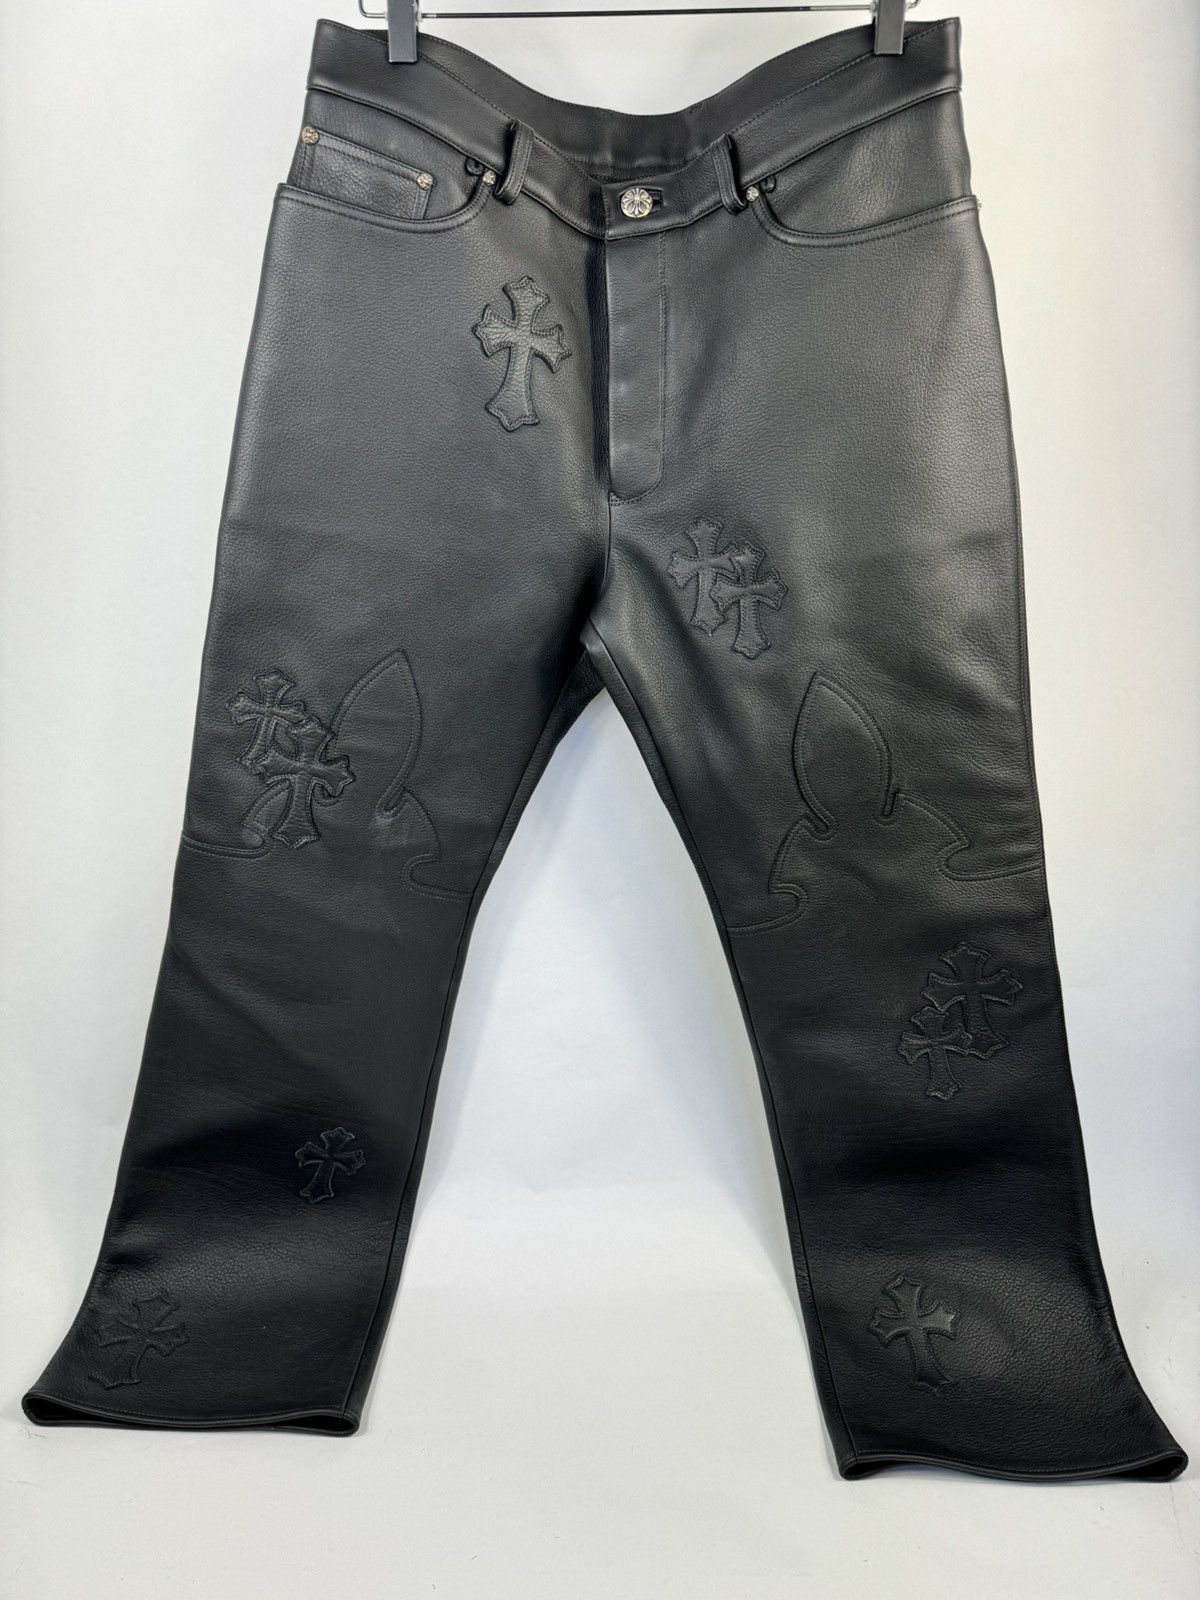 Chrome Hearts CROSS PATCH LEATHER PANTS | Grailed